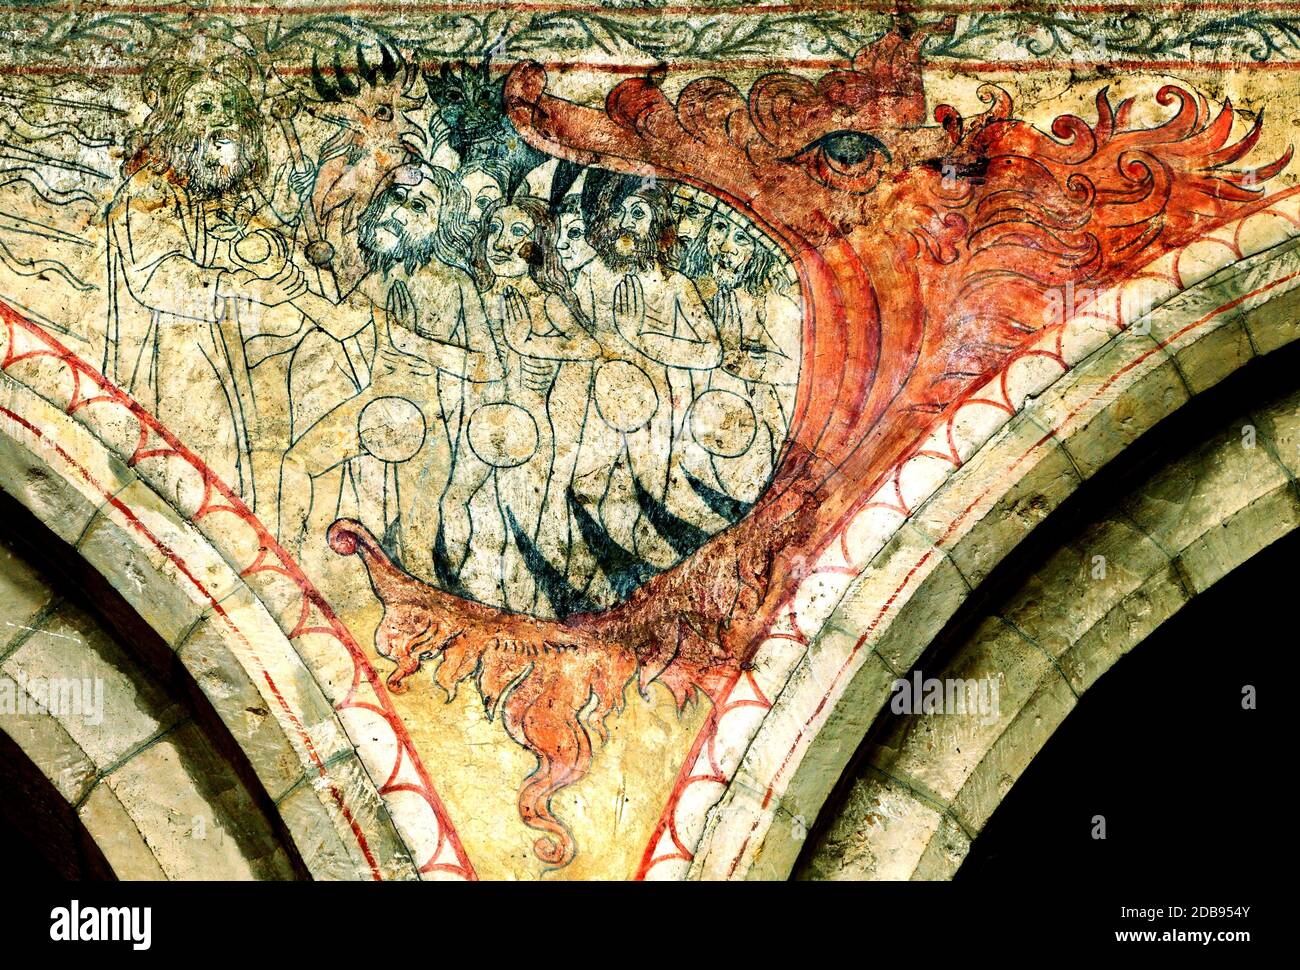 Pickering, Yorkshire.  Descent into Hell, in the Jaws of a Dragon, Medieval wall painting. Adam with apple, Jaws of Hell, paintings, England Stock Photo